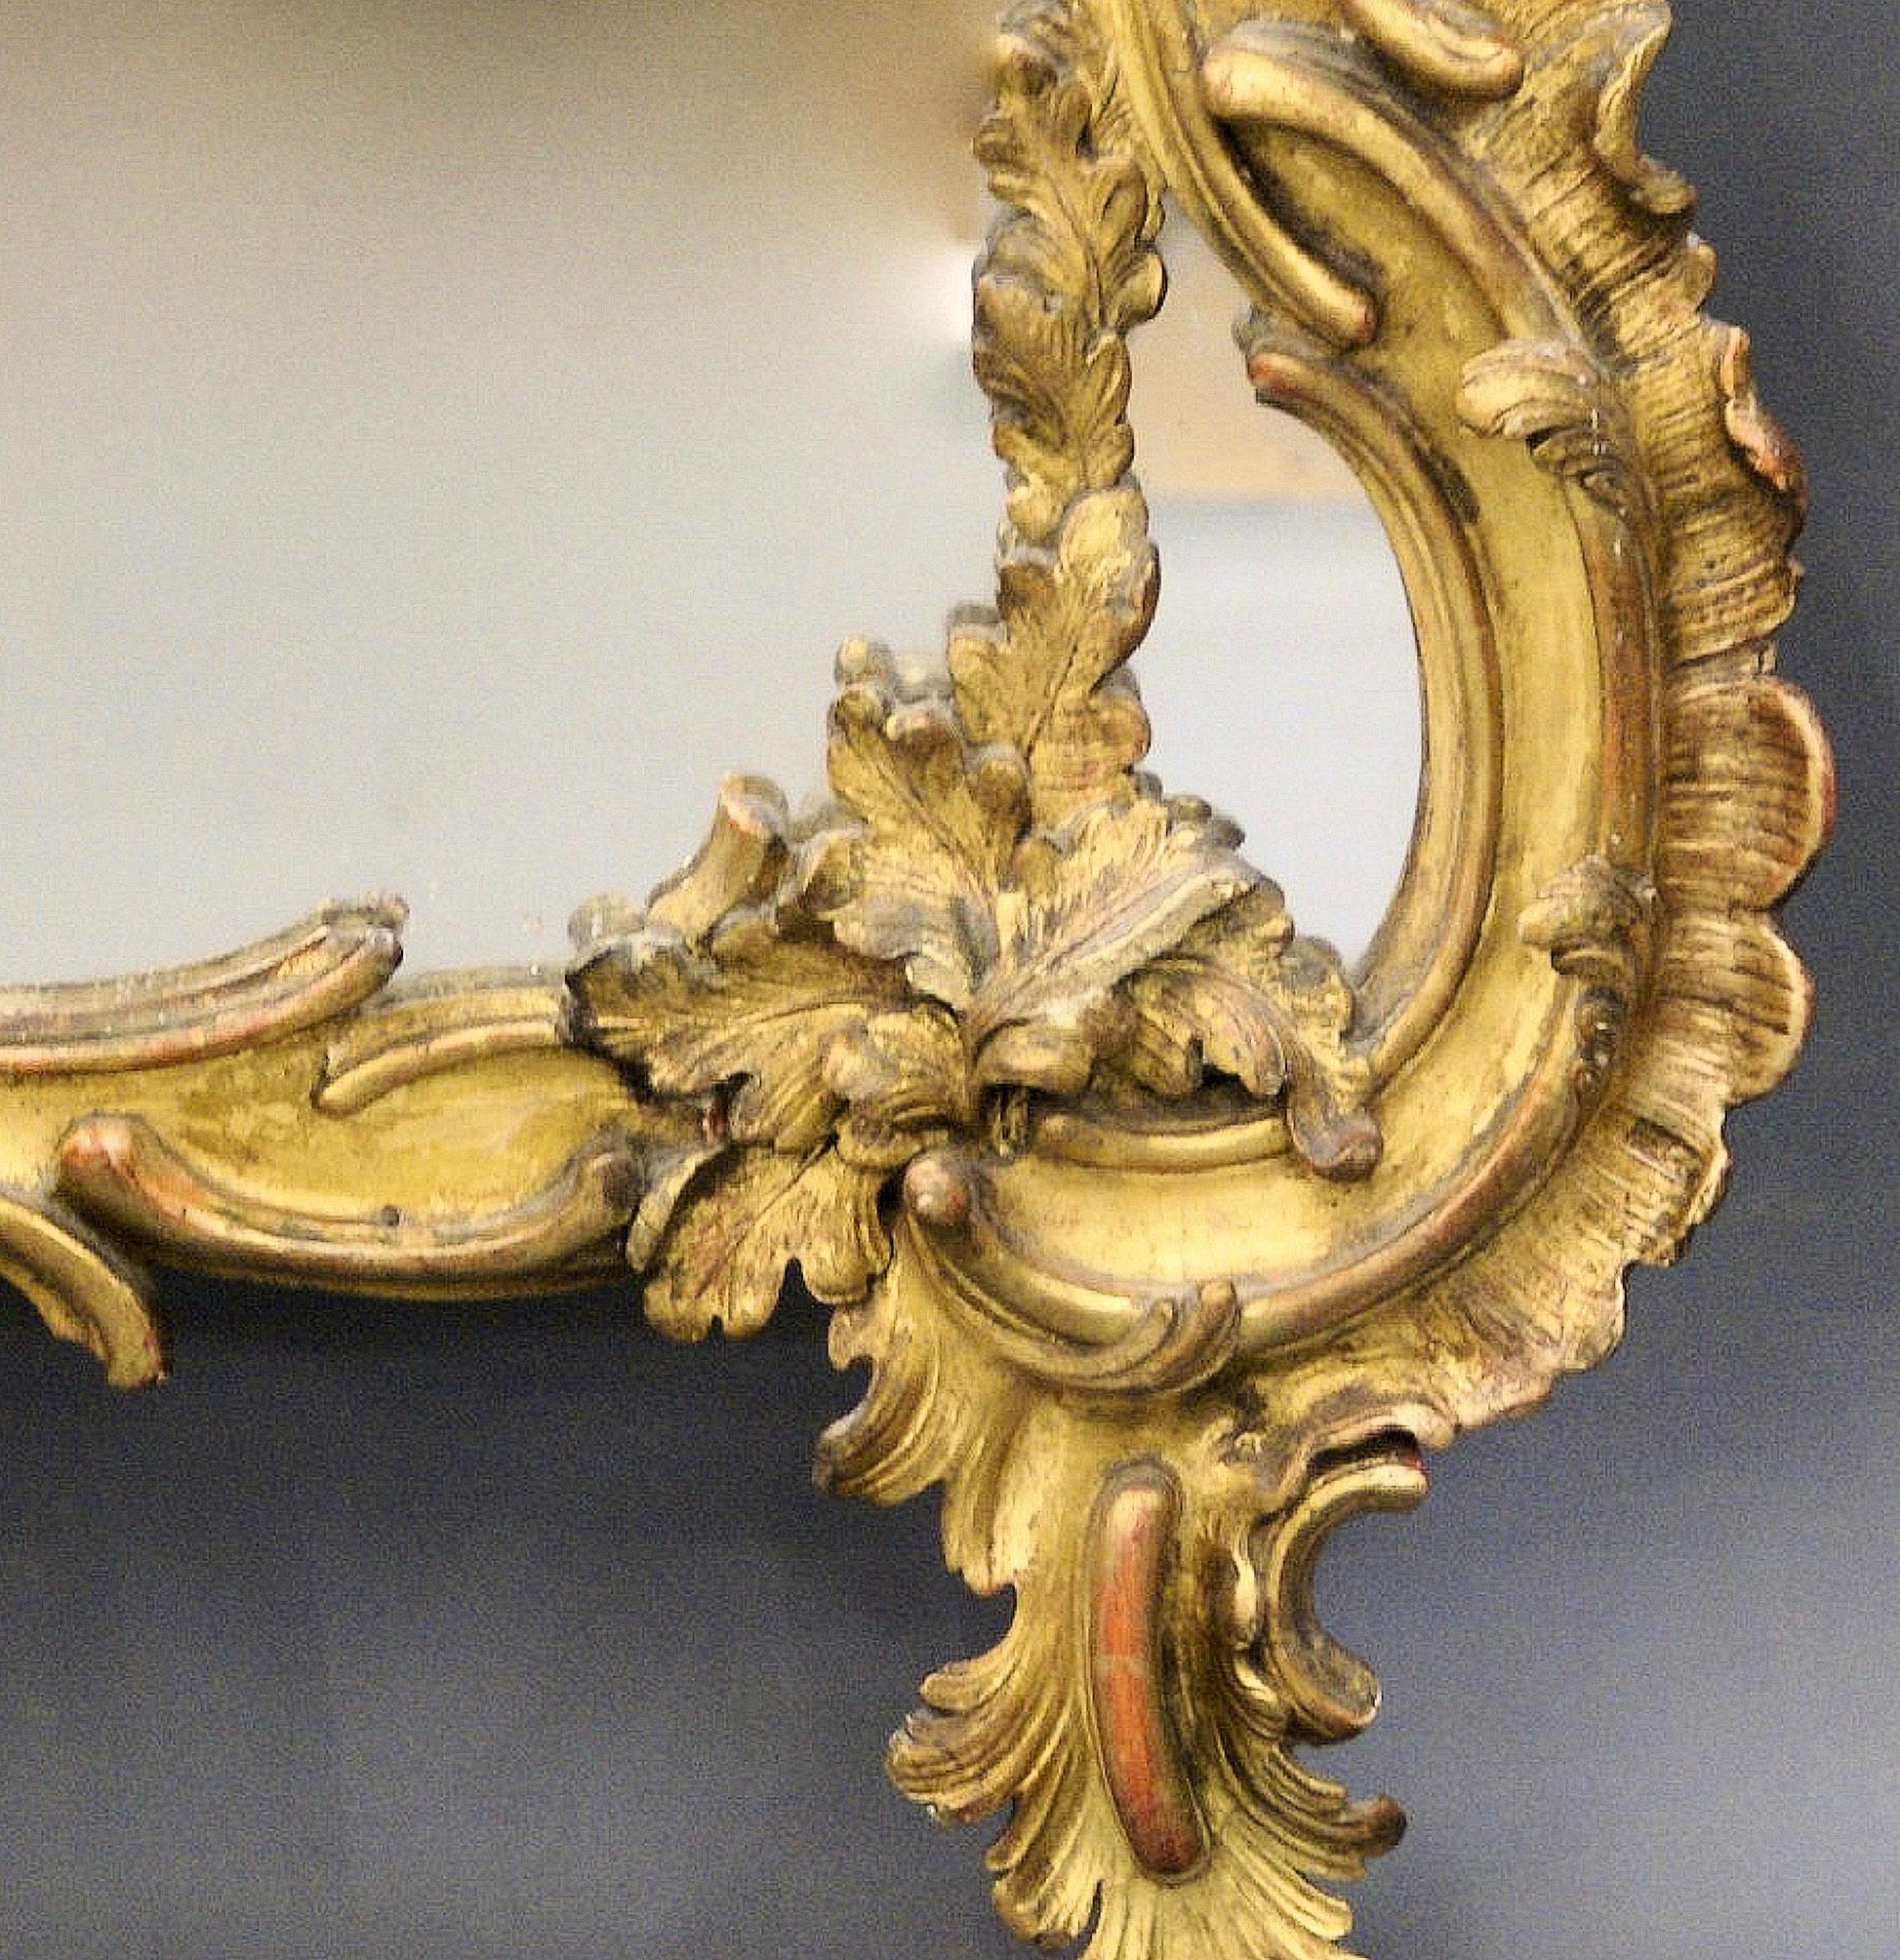 Oversized 19th c. French Ornate Gilt Mirror In Good Condition For Sale In London, GB